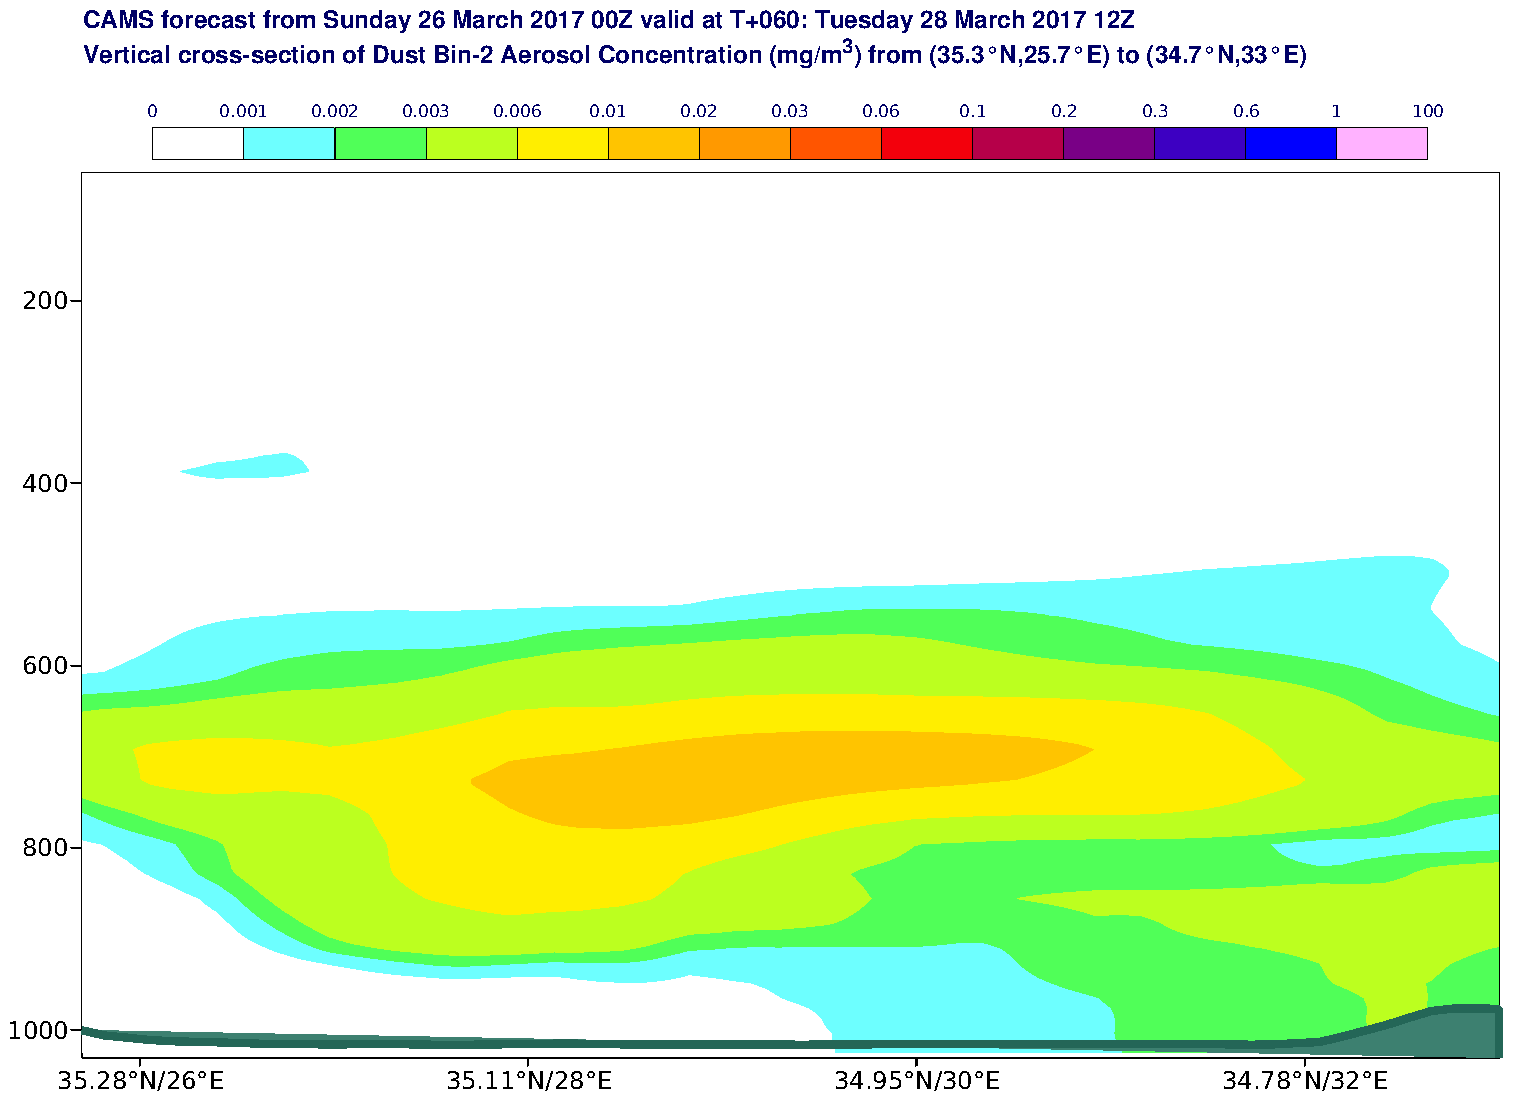 Vertical cross-section of Dust Bin-2 Aerosol Concentration (mg/m3) valid at T60 - 2017-03-28 12:00